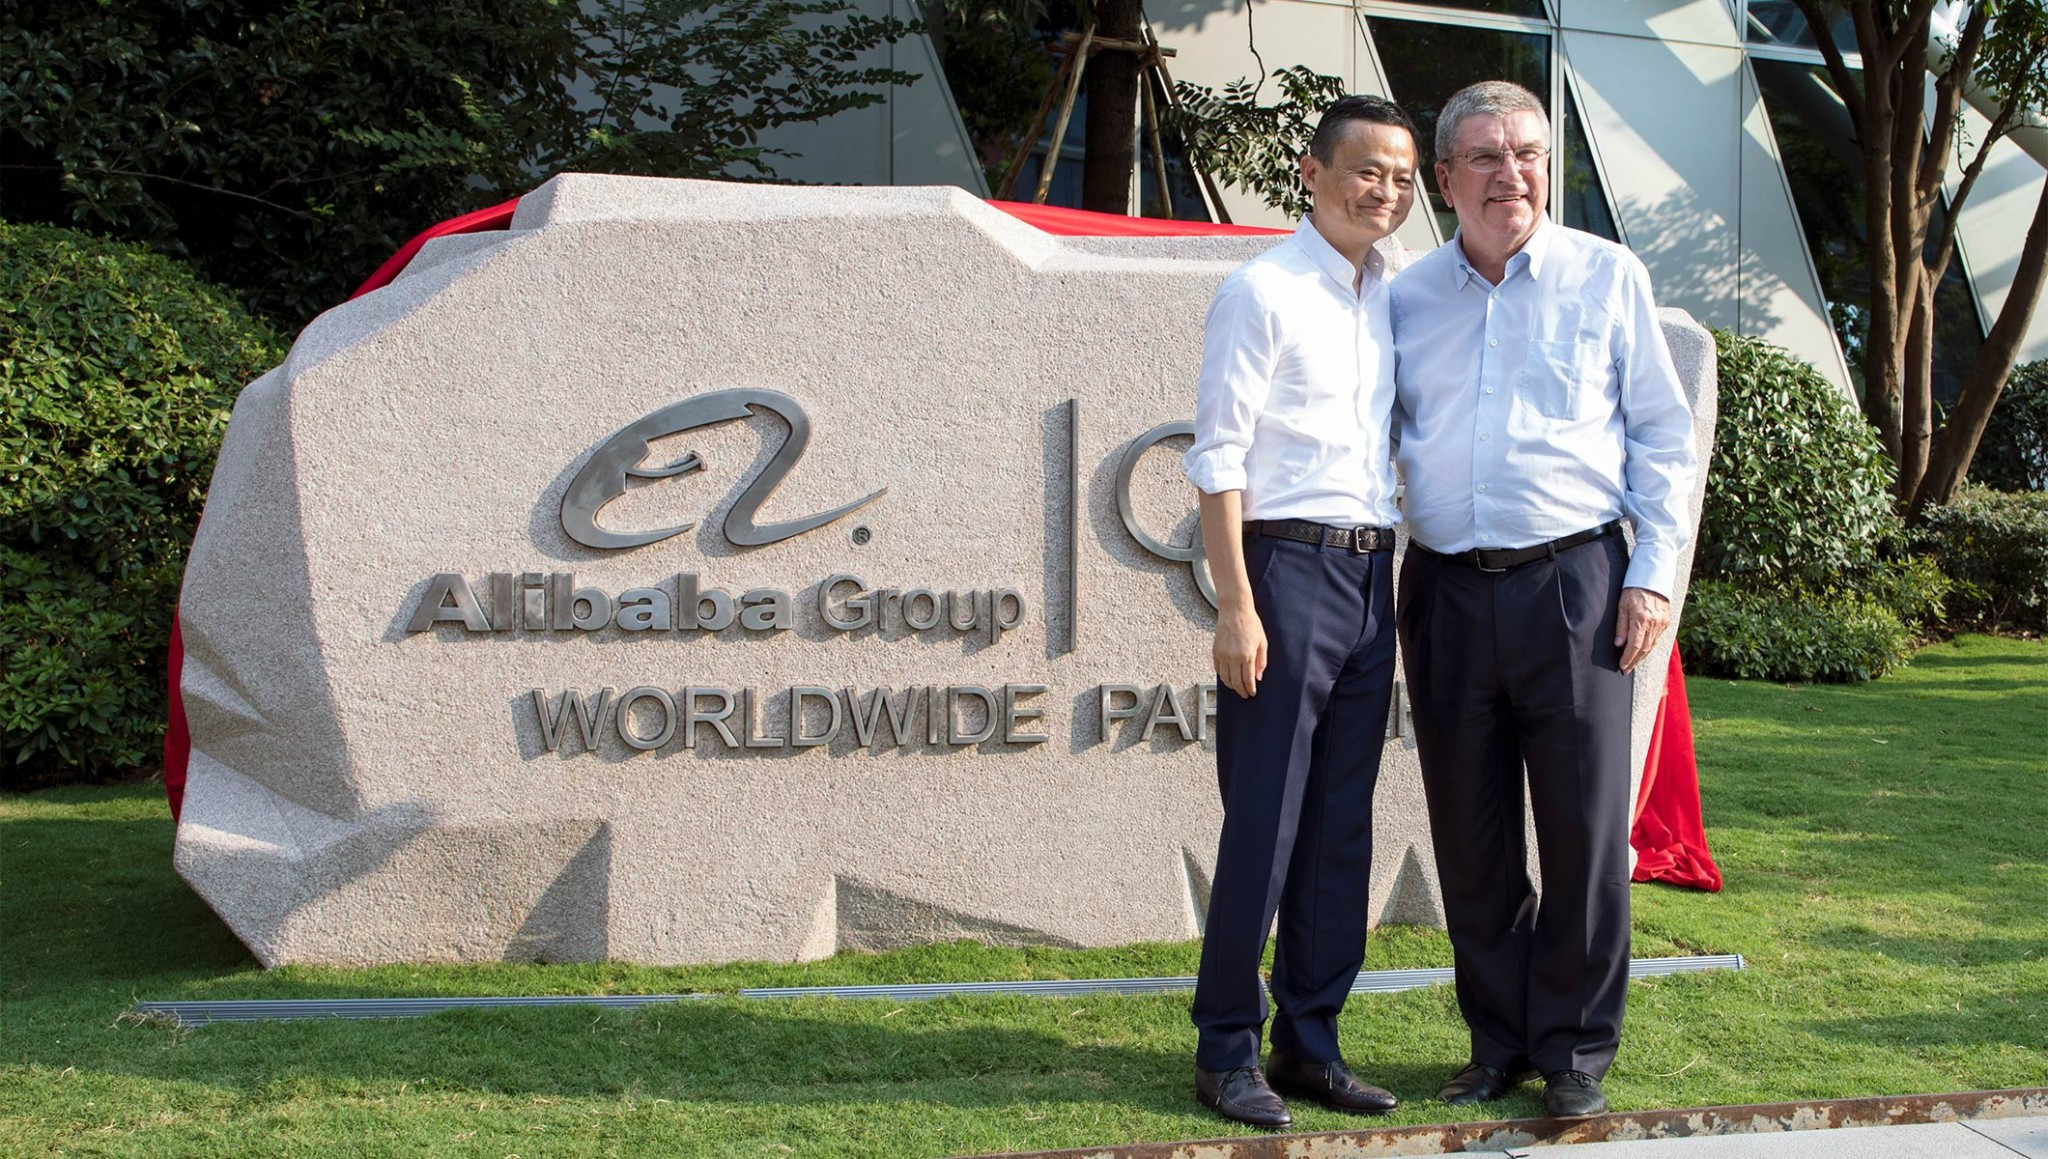 Alibaba chairman unveils new logo on plaque after meeting IOC President Bach